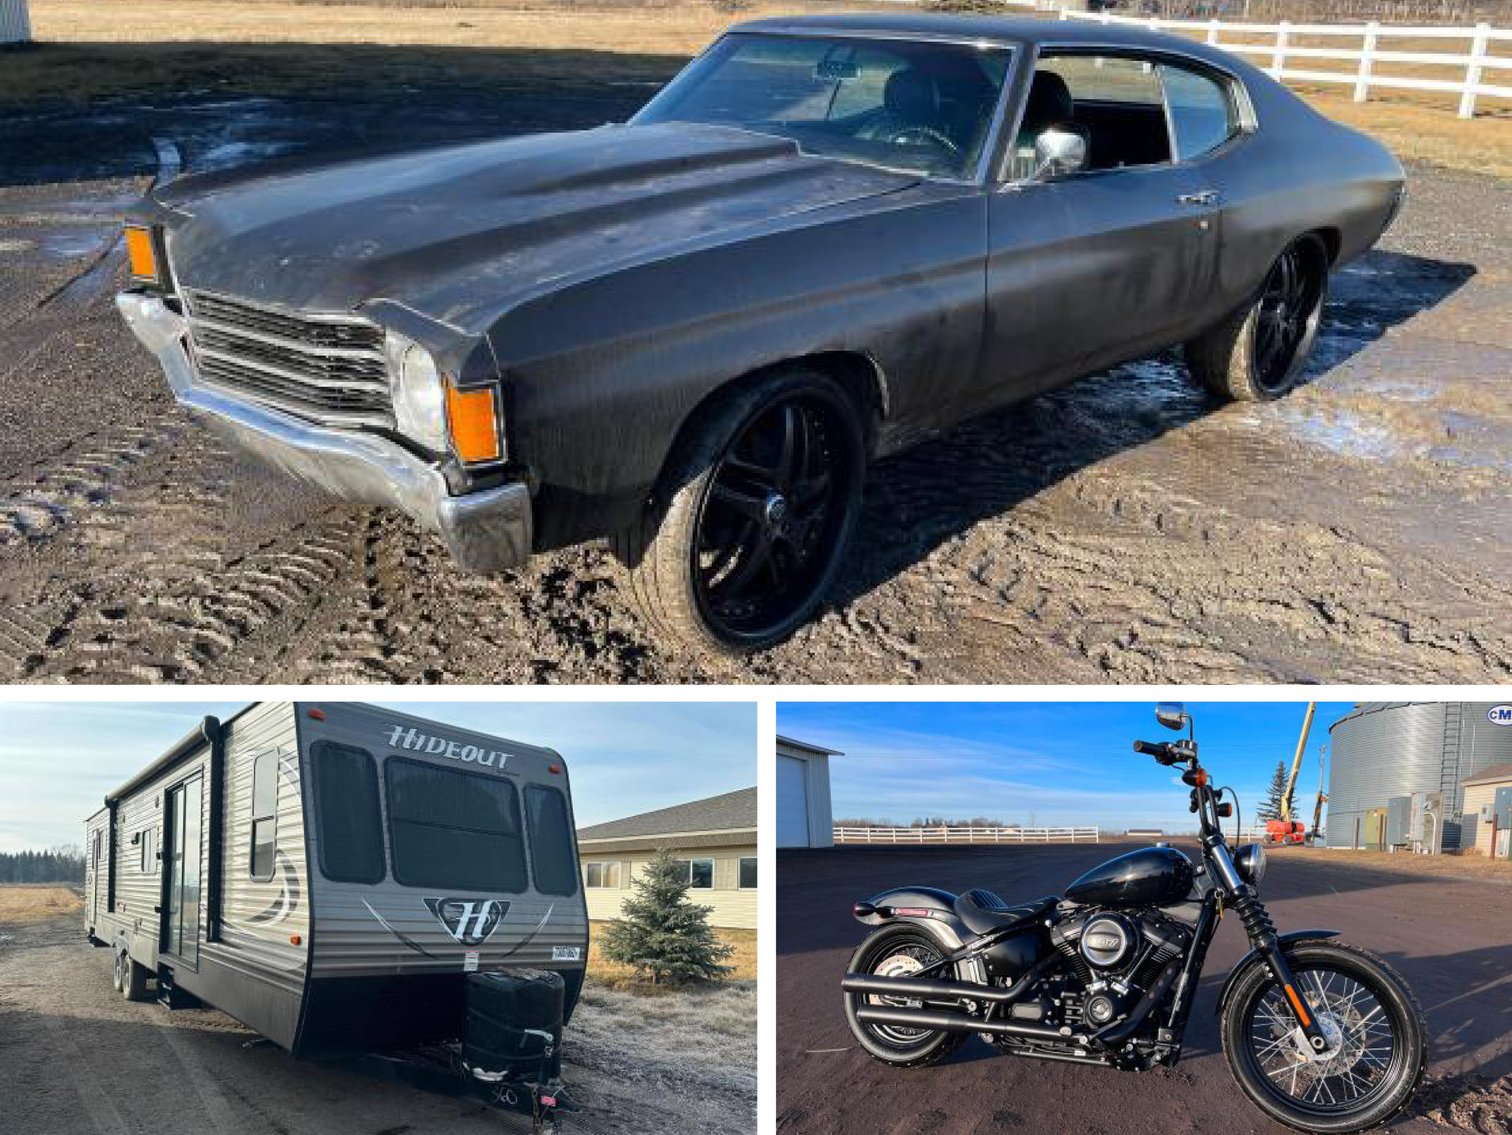 Bank Owned Vehicles, Motorcycles & Camper